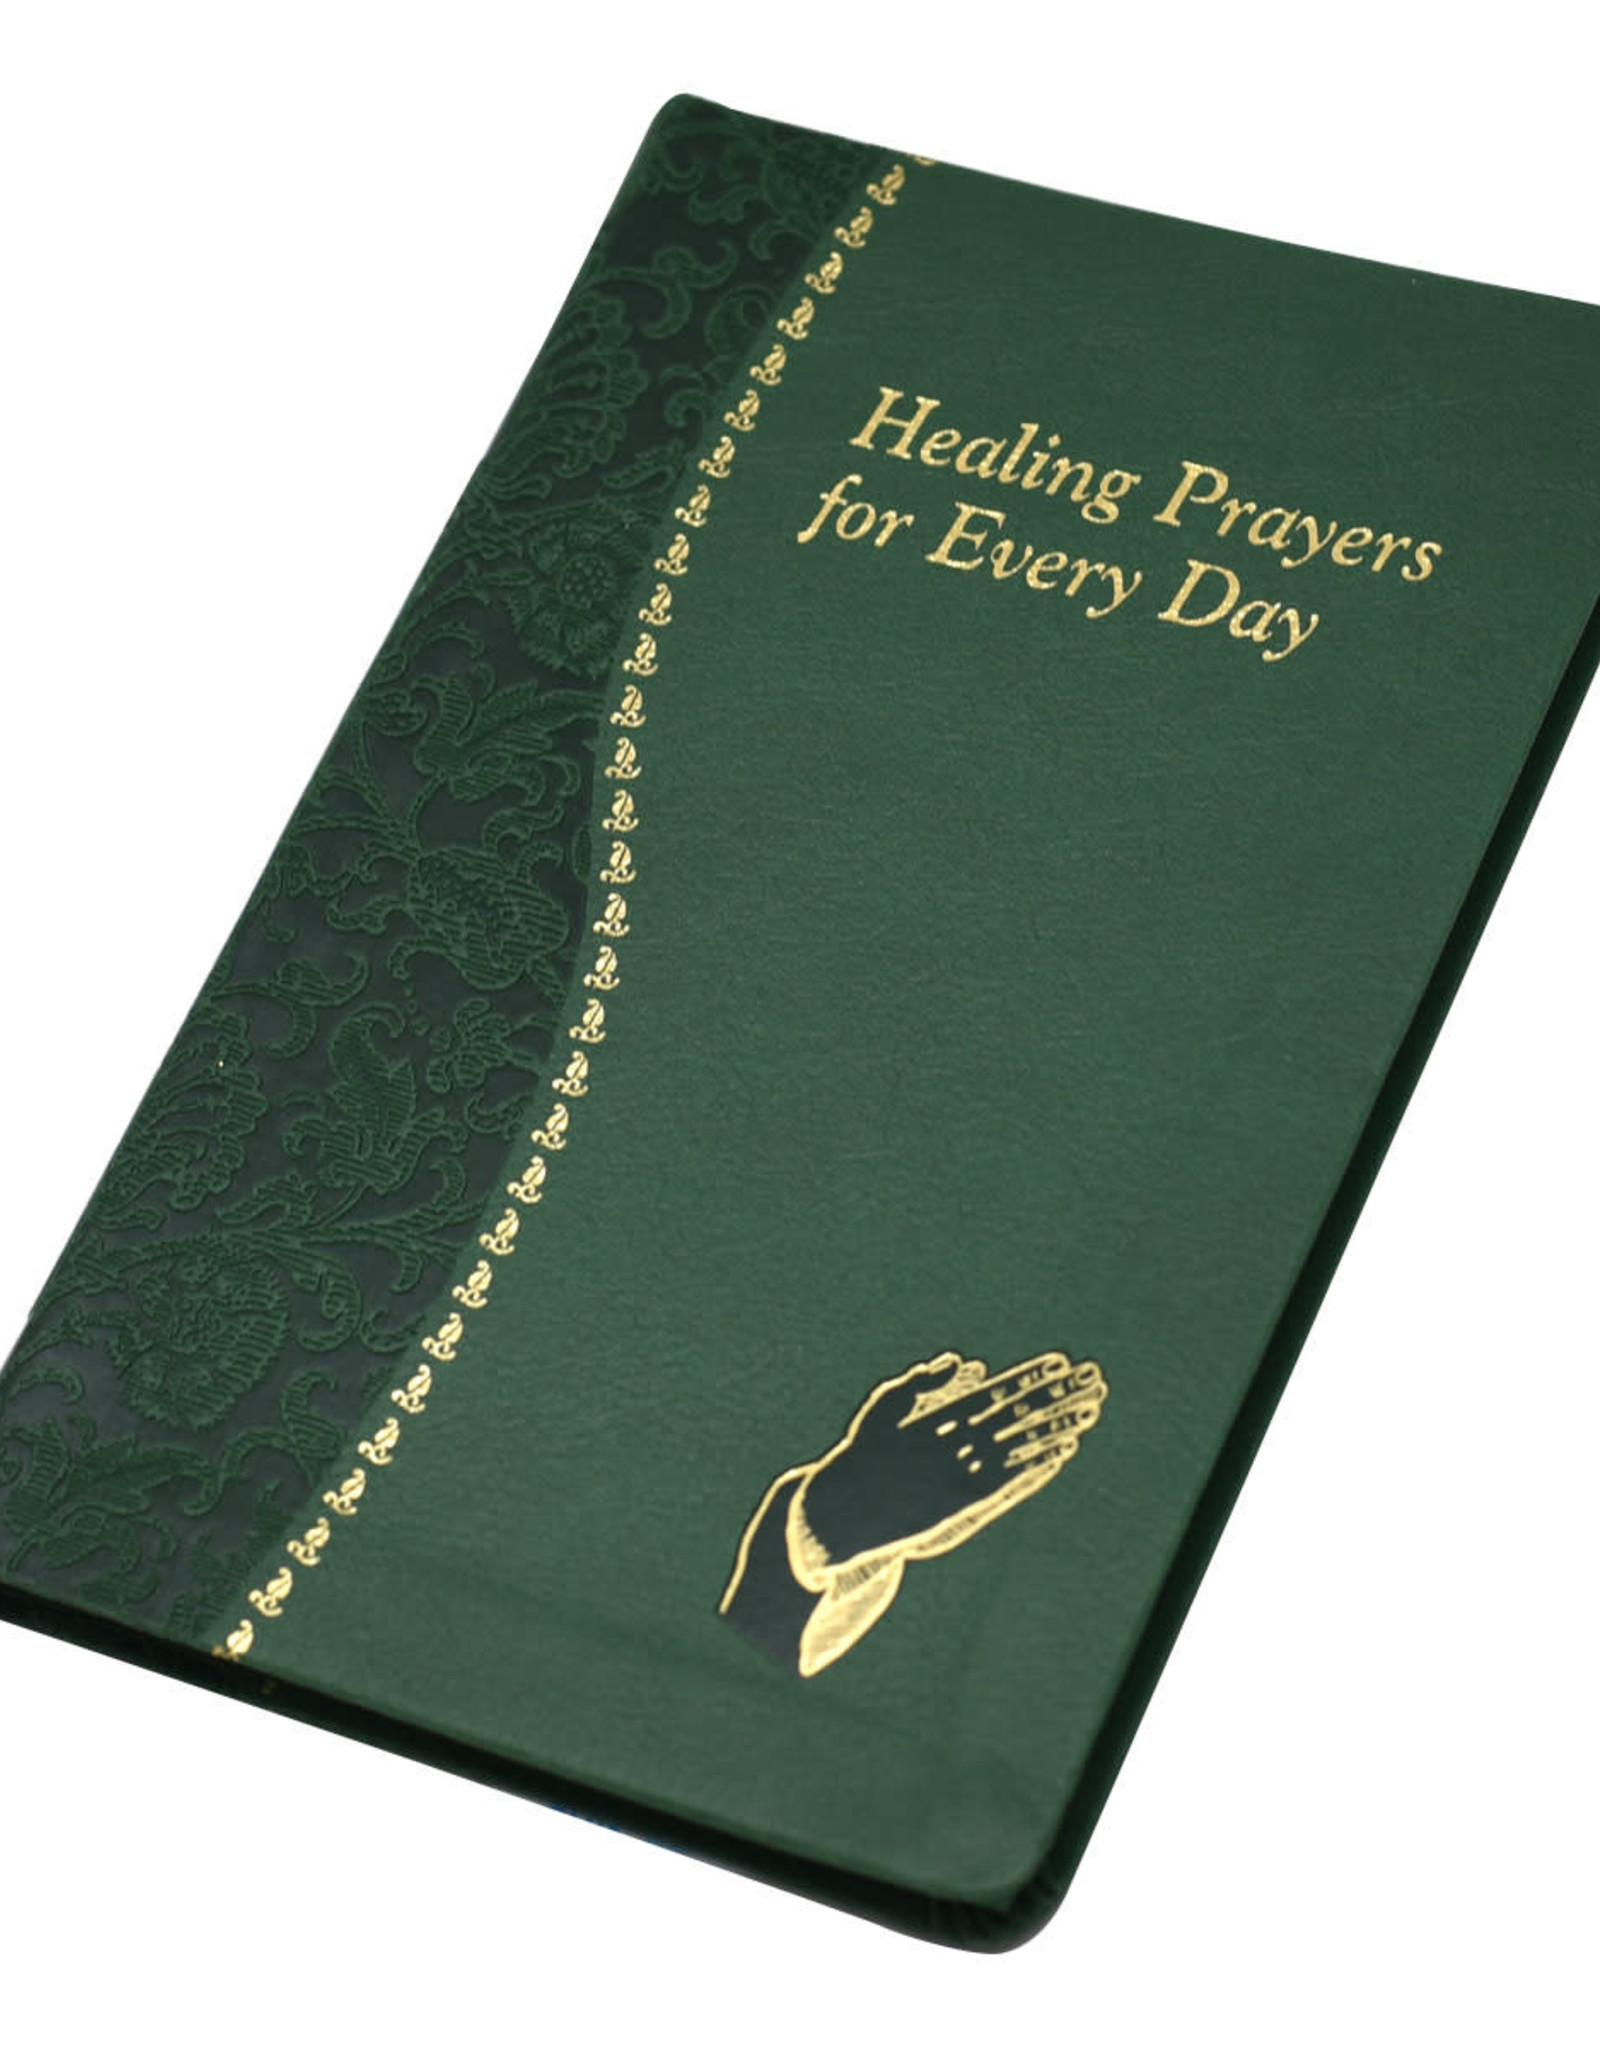 Catholic Book Publishing Healing Prayers for Every Day:  Minute Meditations for Every Day Containing a Scripture Reading, A Reflection and a Prayer (imitation leather)